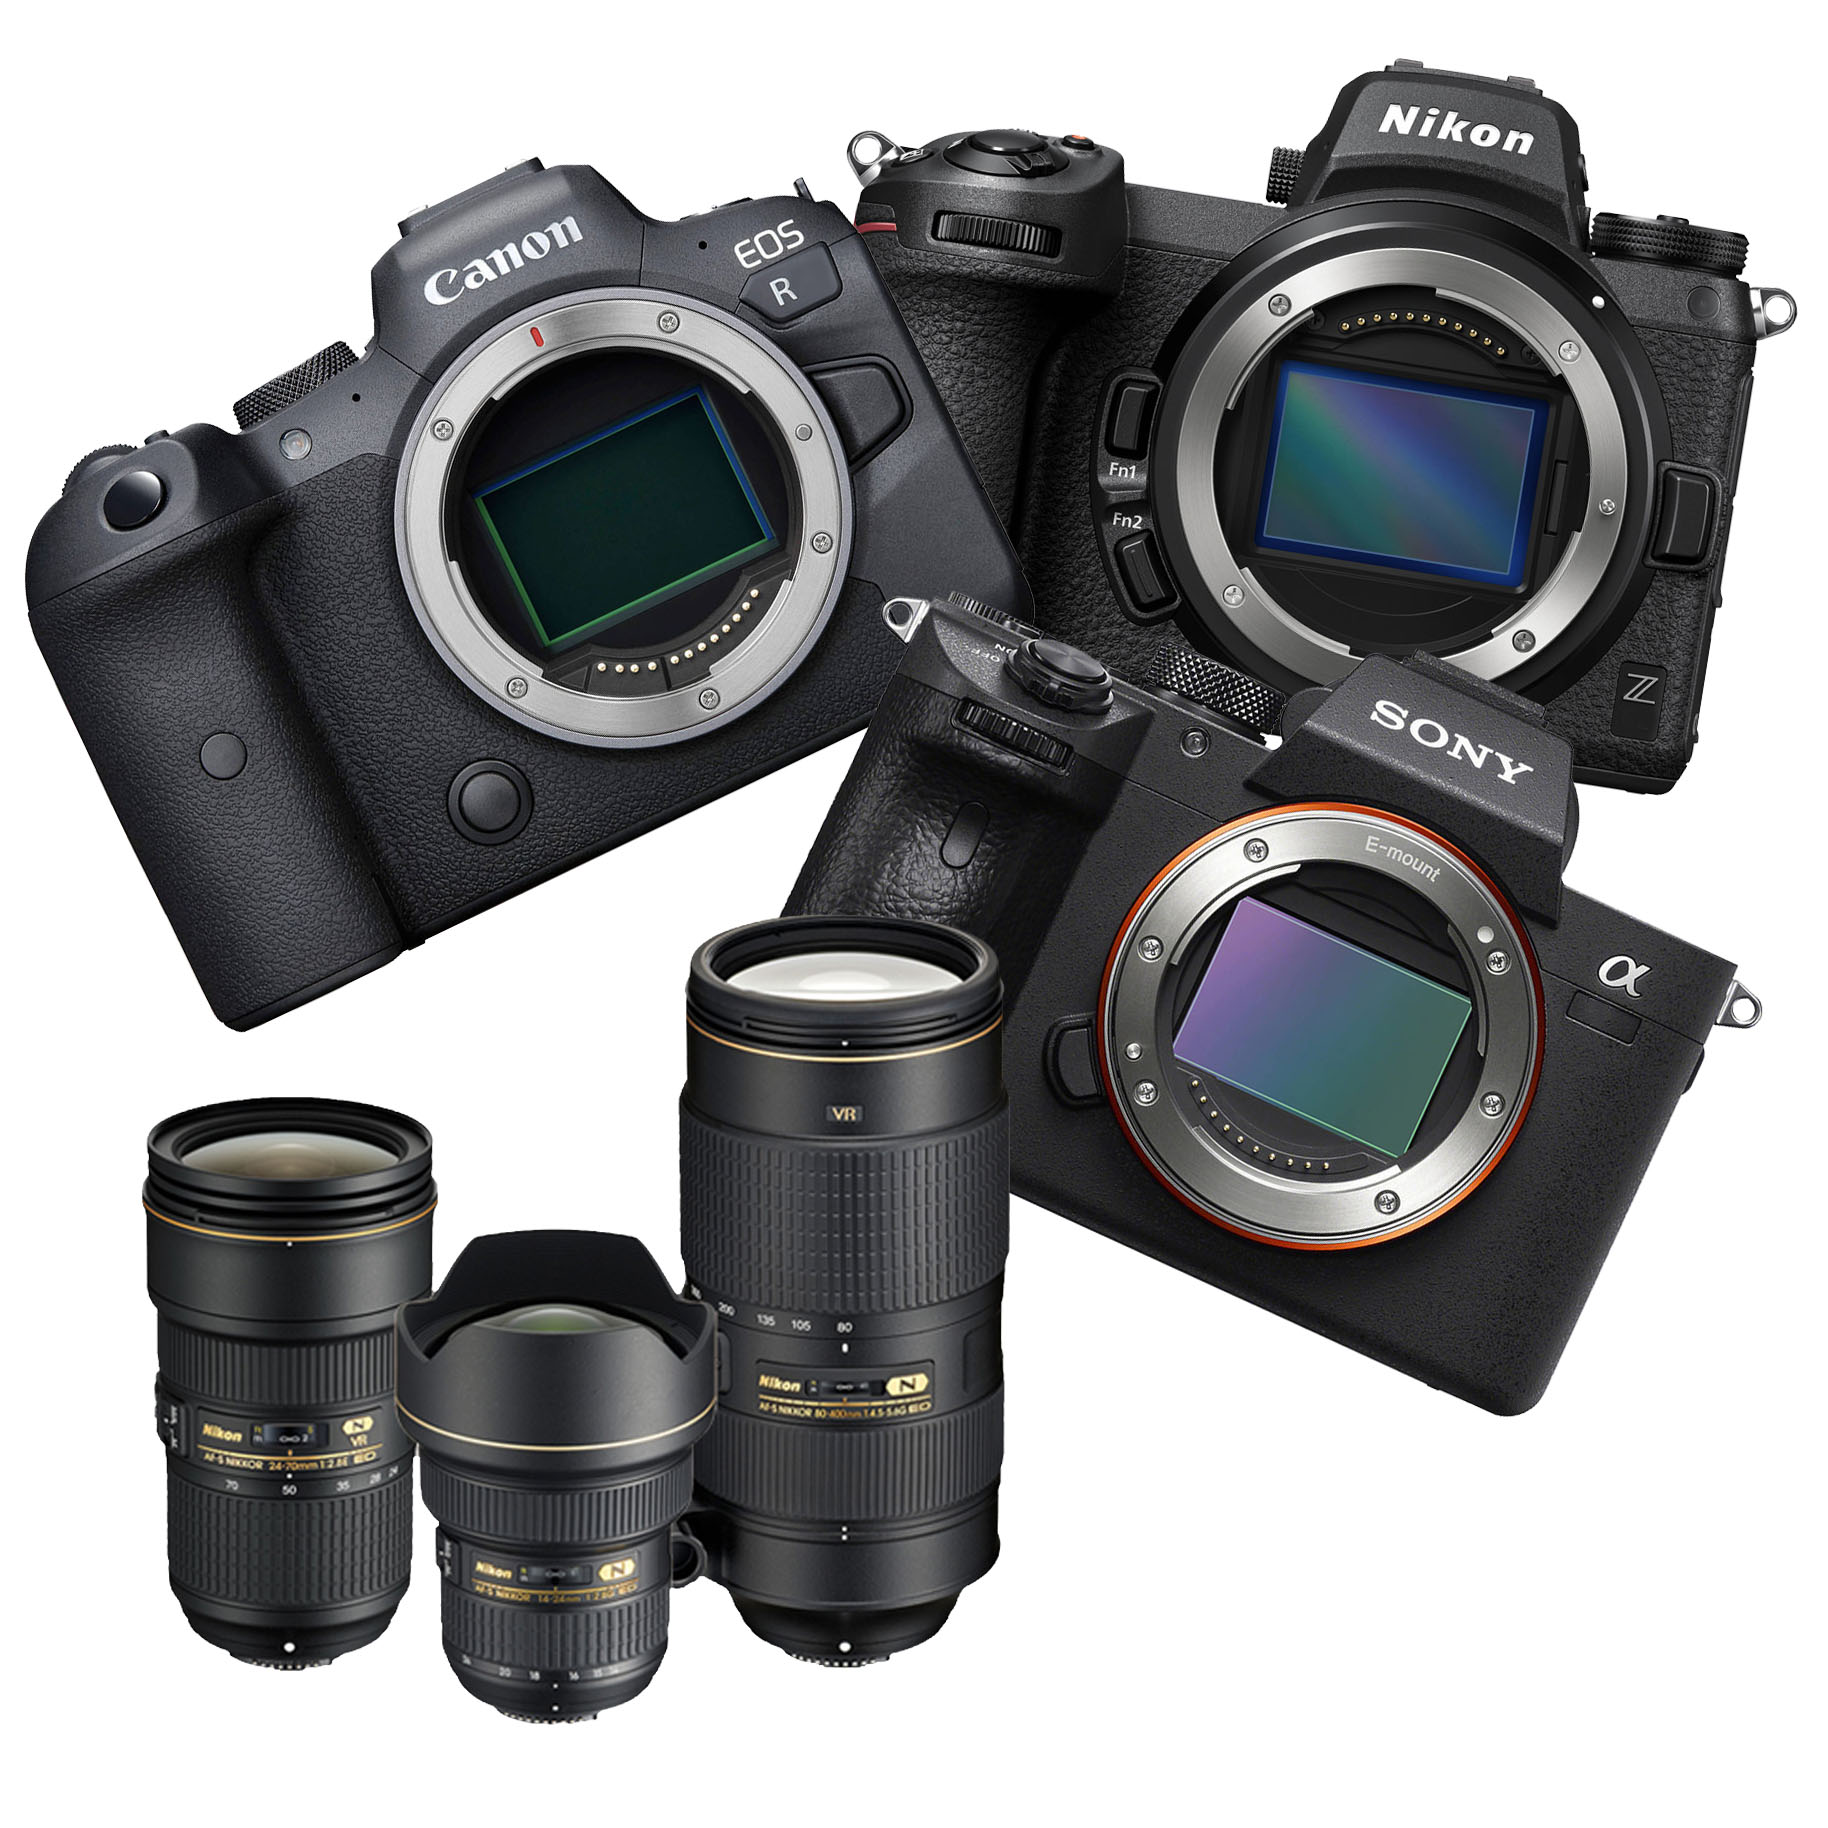 picture of different camera brands including Sony, Canon and Nikon with some lenses